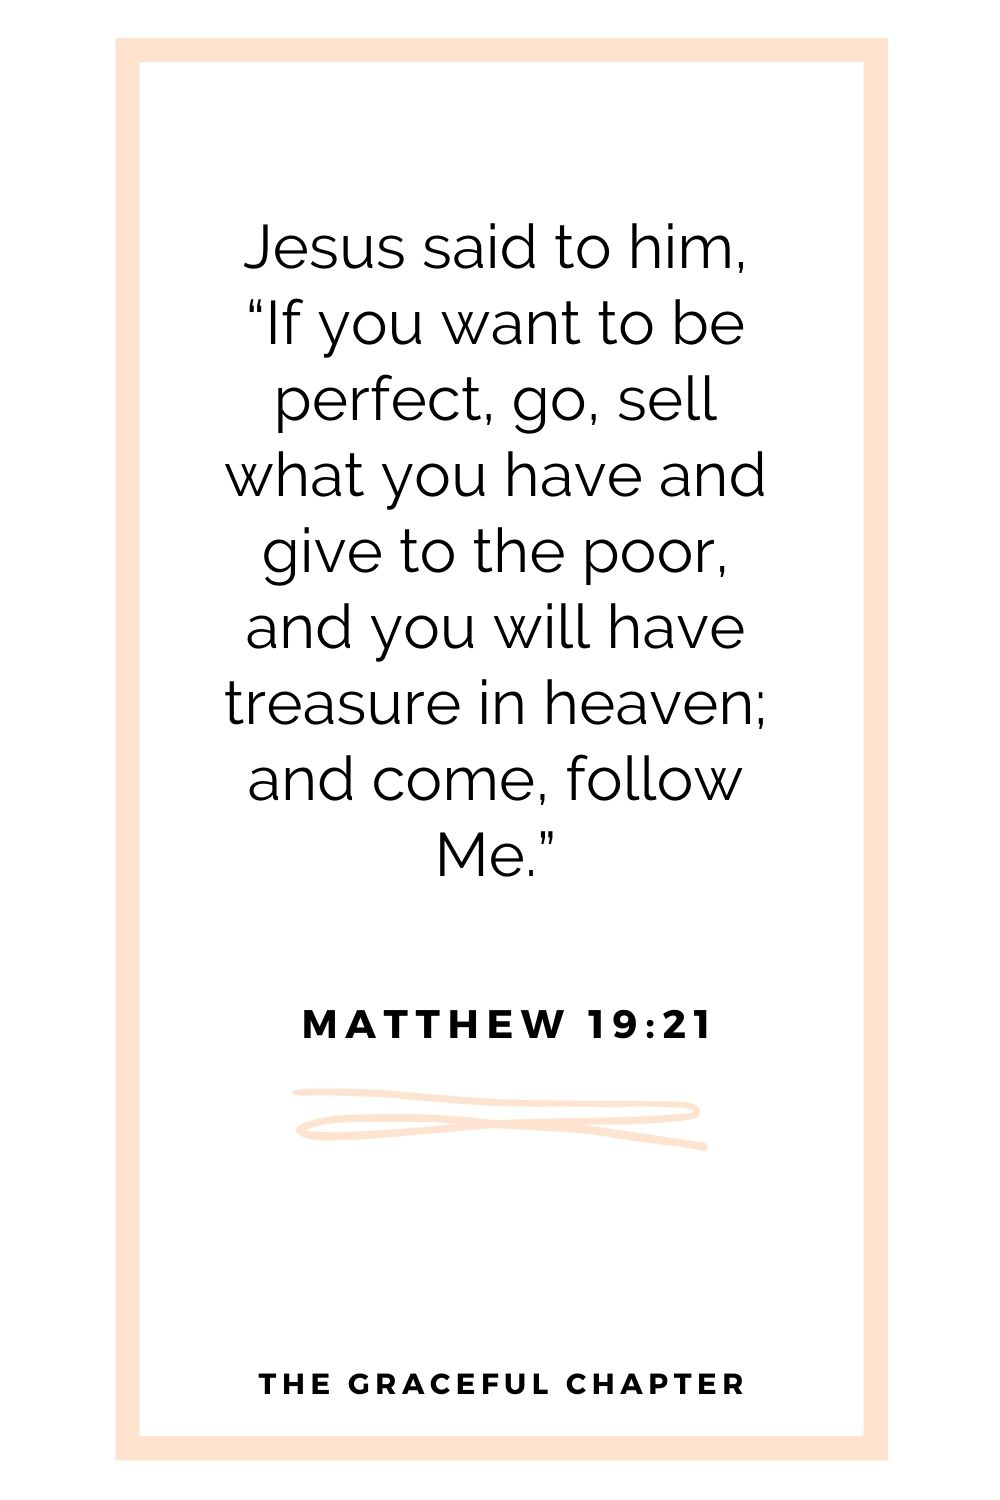 Jesus said to him, “If you want to be perfect, go, sell what you have and give to the poor, and you will have treasure in heaven; and come, follow Me.” Matthew 19:21